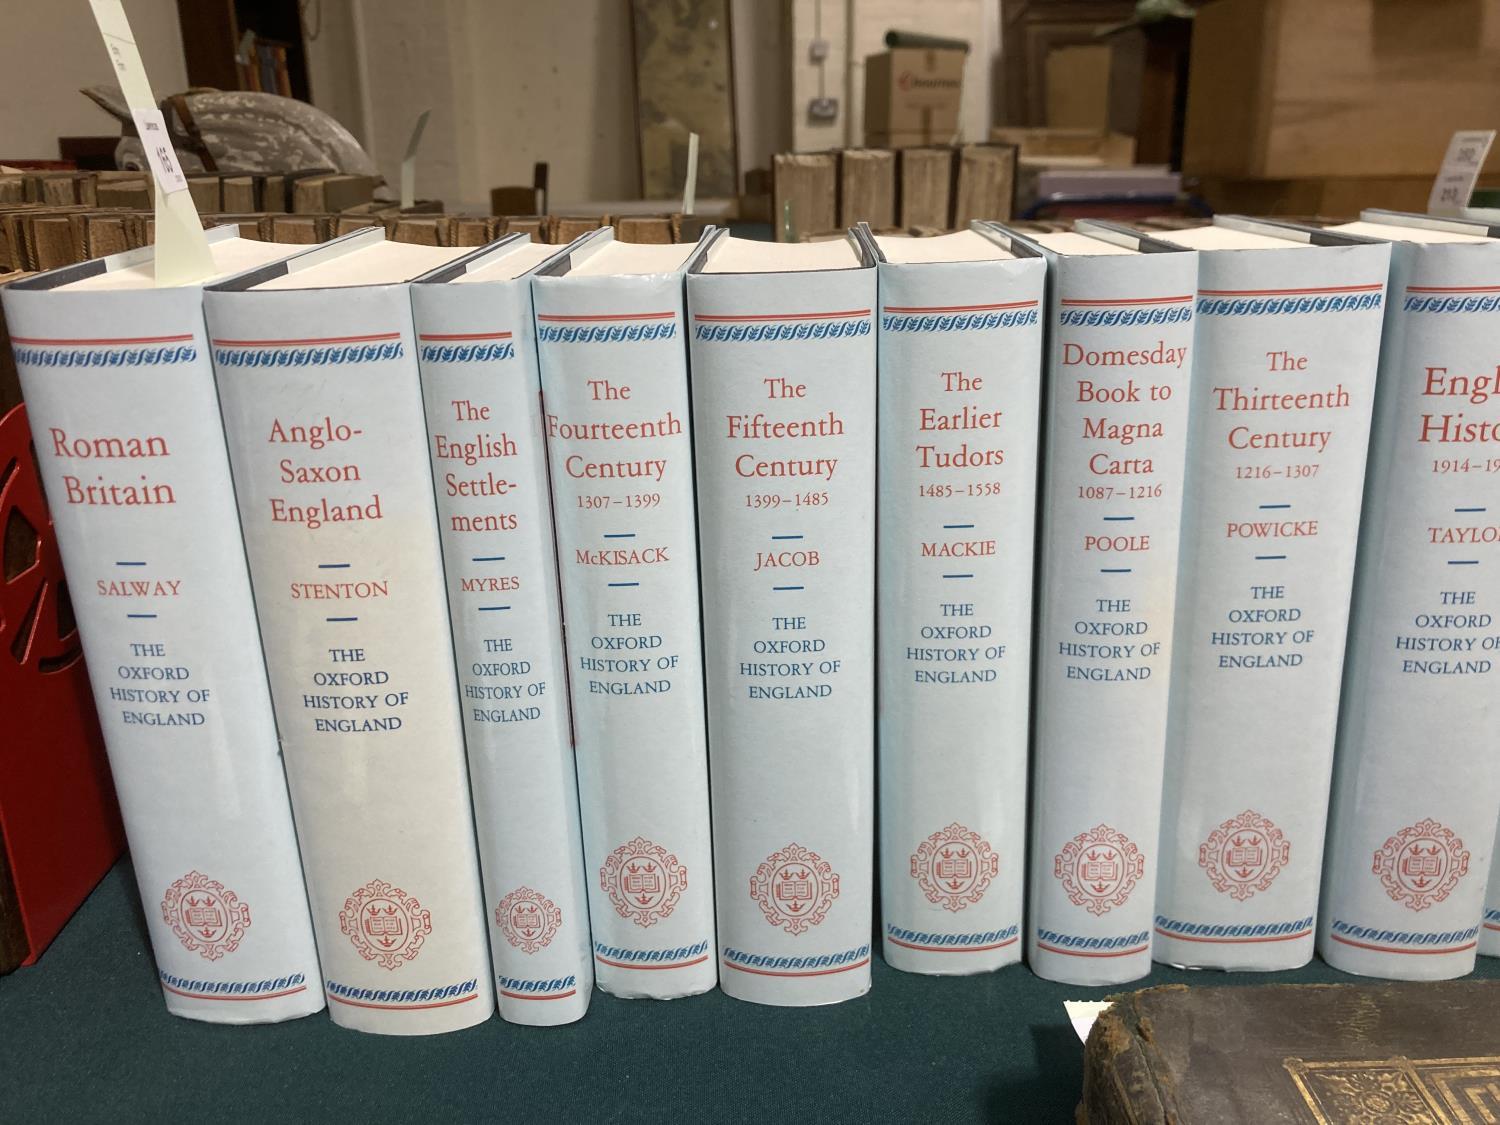 Clarke, Sir George, editor. The Oxford History of England, 16 volumes, original cloth, dust-jackets,